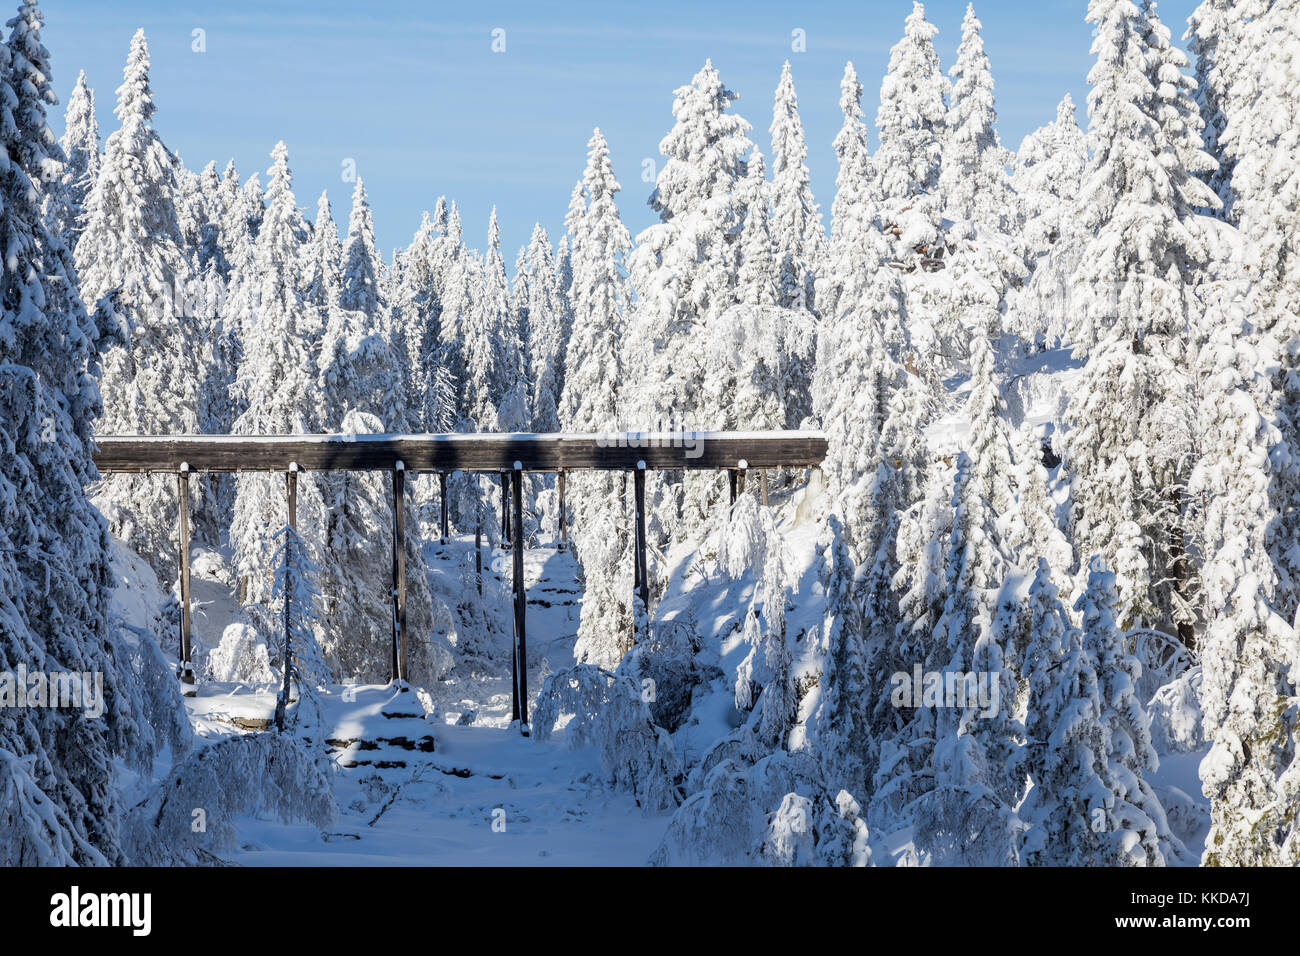 Wooden aqueduct from old silver mines surrounded by snow covered trees Stock Photo